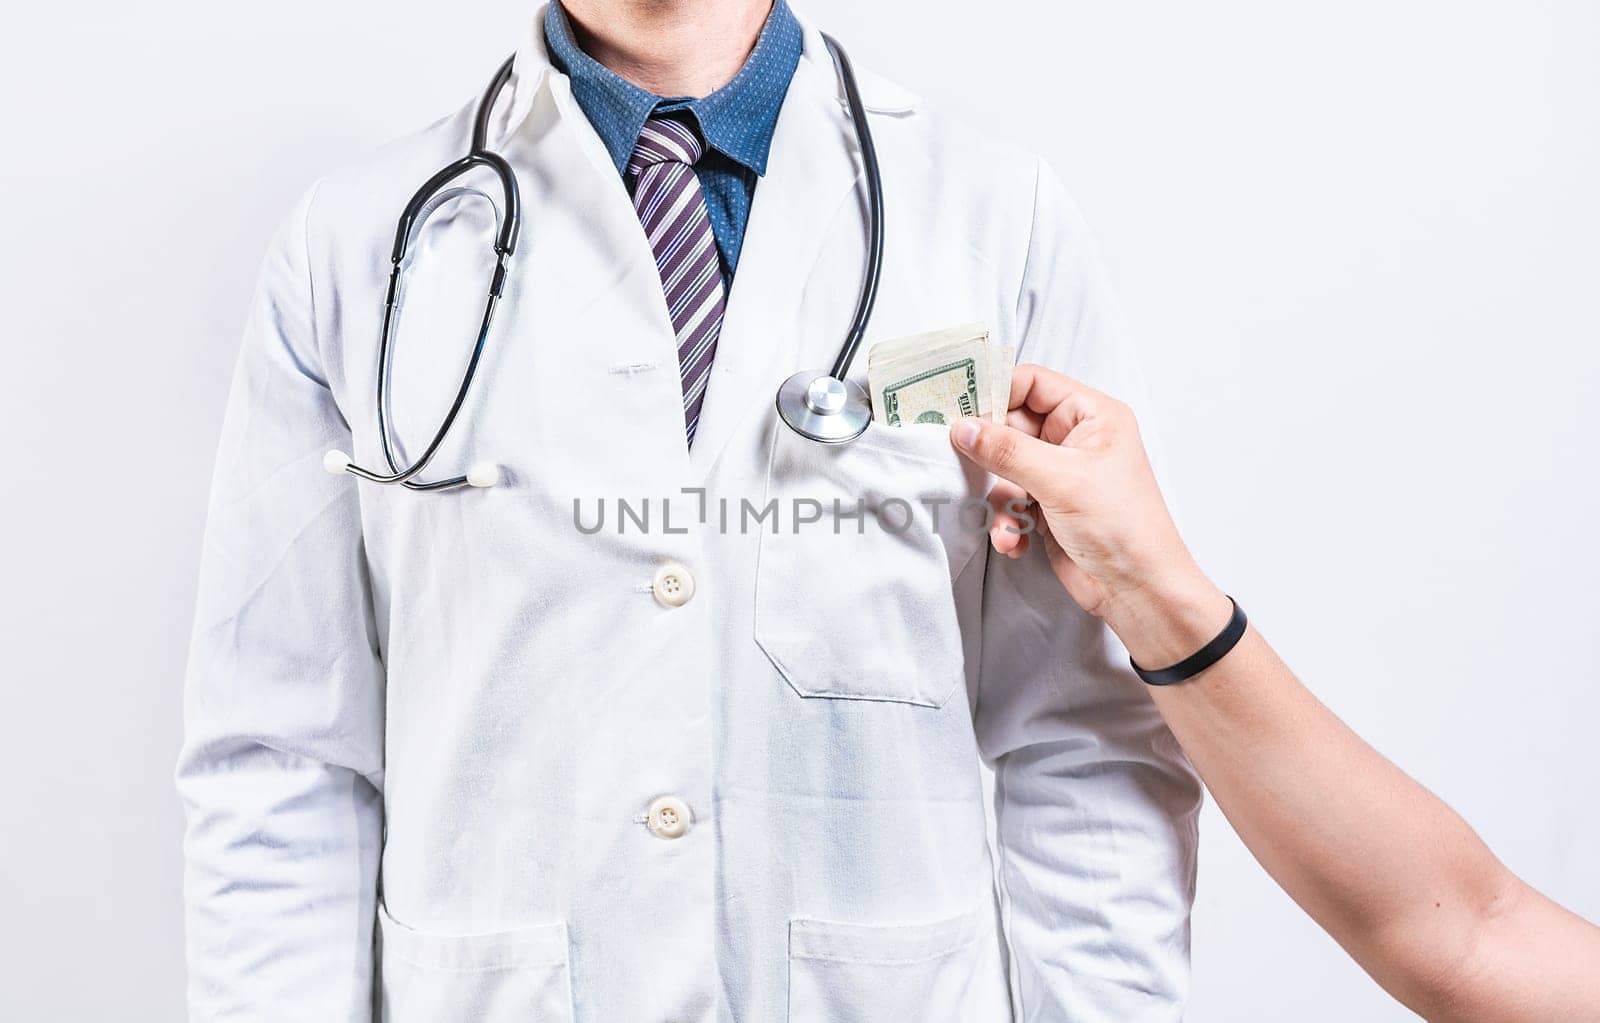 Medical bribery concept. Hand of person bribing doctor, Hands putting money in doctor pocket